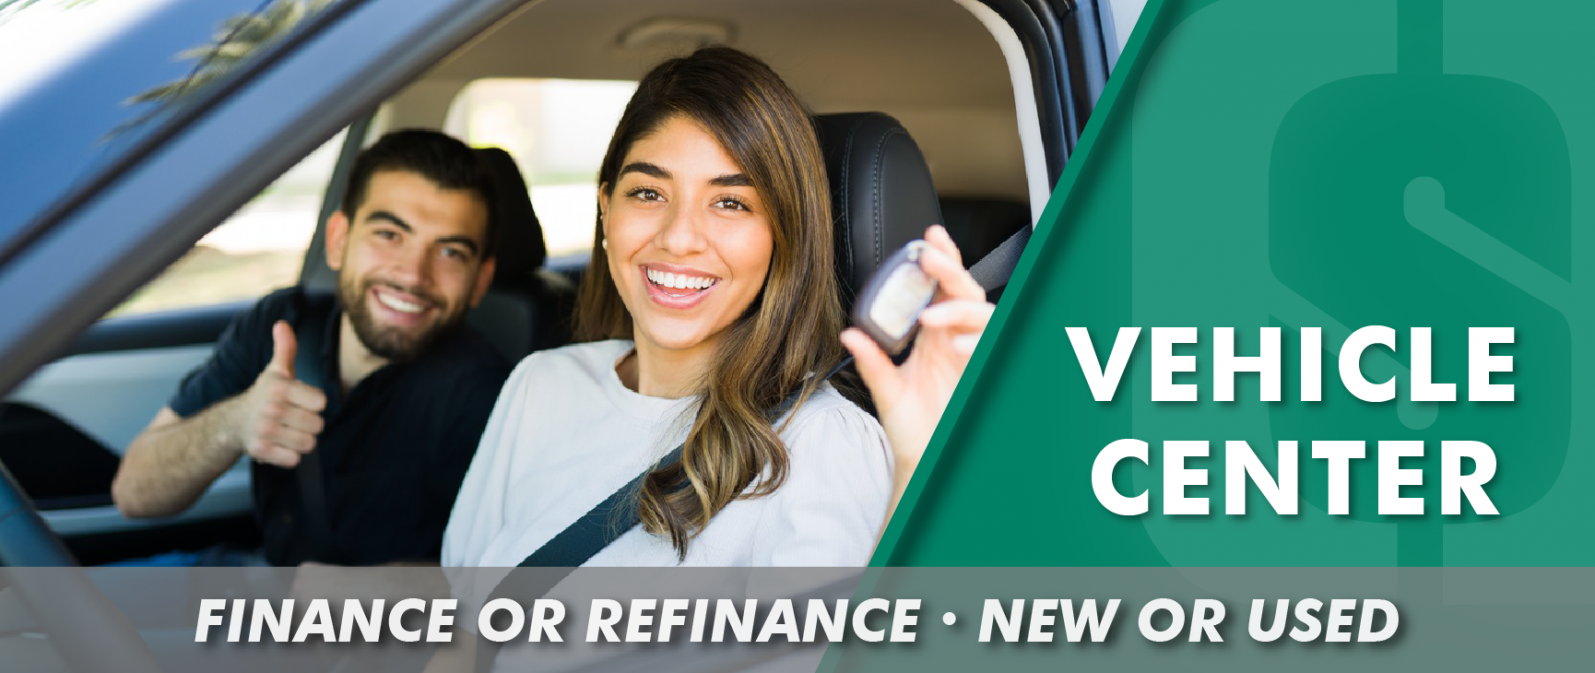 Vehicle Center - Finance or Refinance | New Or Used